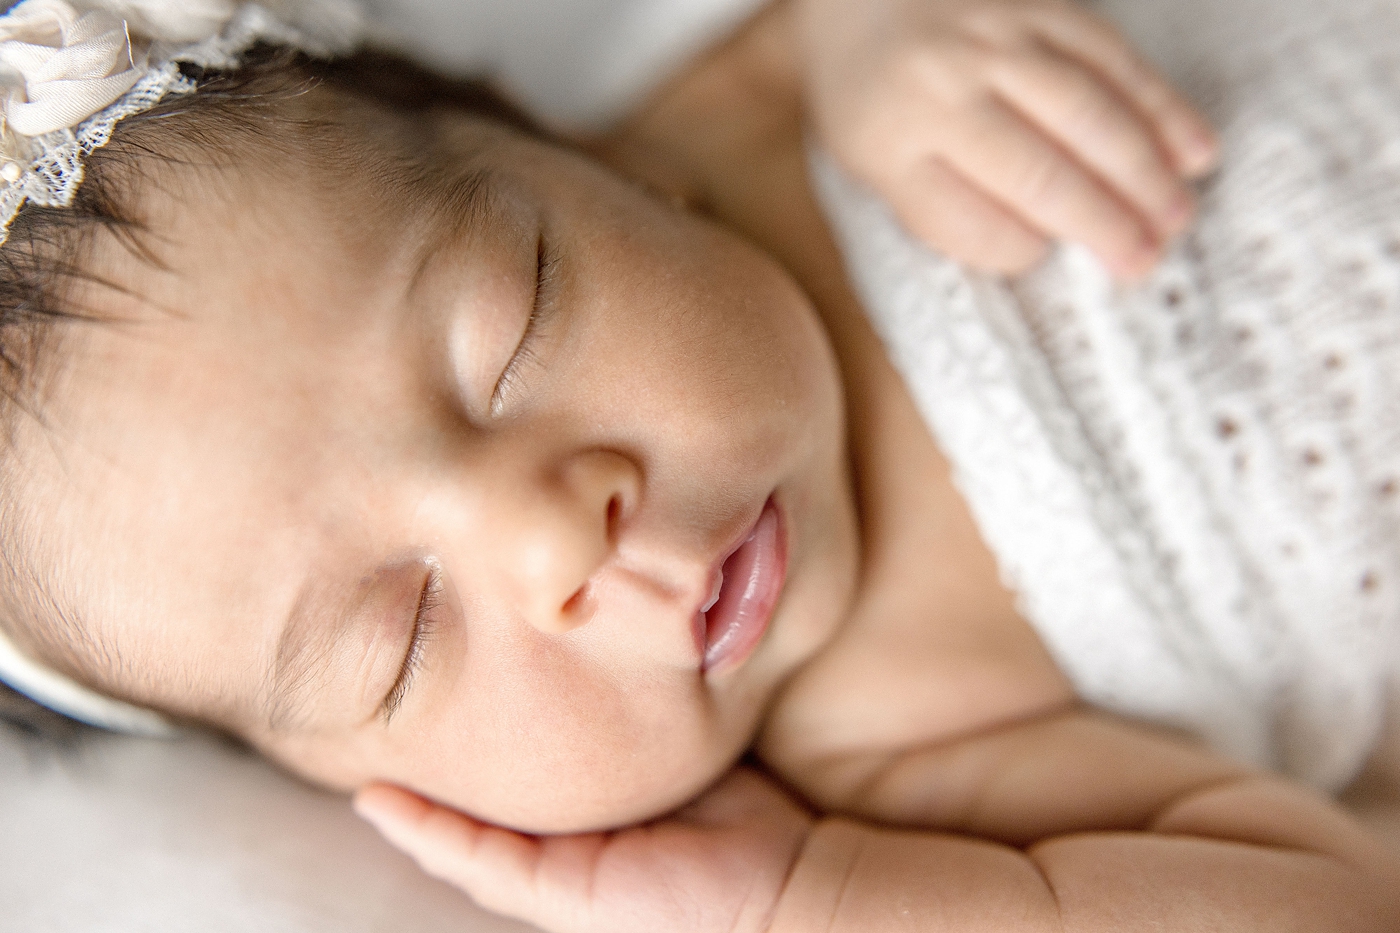 Close up of baby details during Miami in home lifestyle newborn session. Photo by Ivanna Vidal Photography.